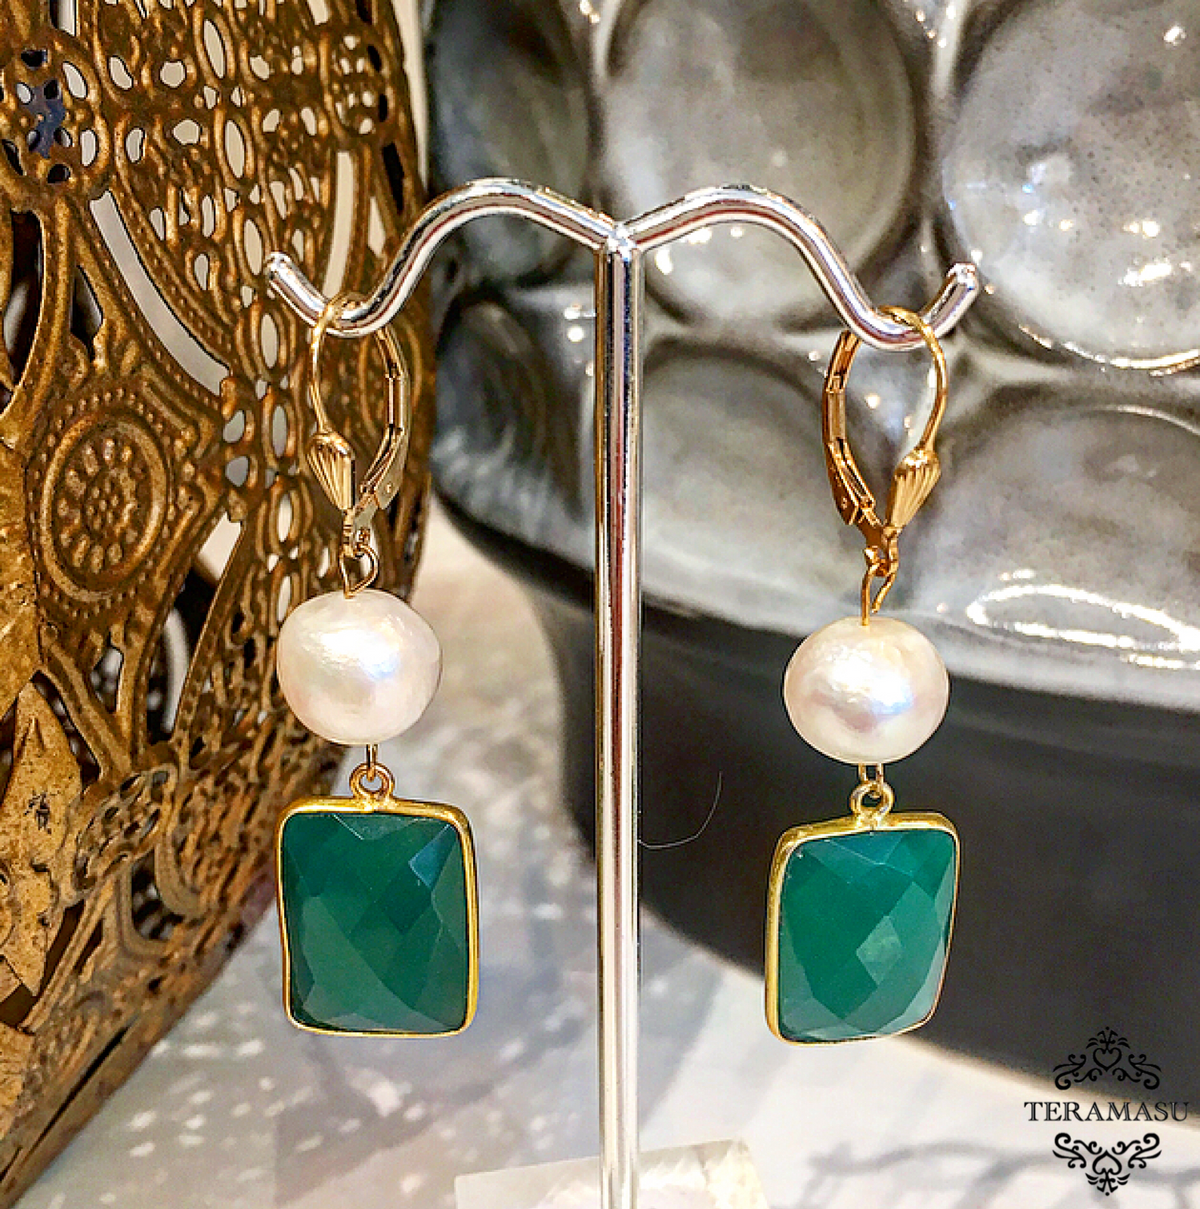 "Want It" Wednesday: Gorgeous & New, Handmade Designer Teramasu Green Onyx and Pearl Leverback Drop Earrings